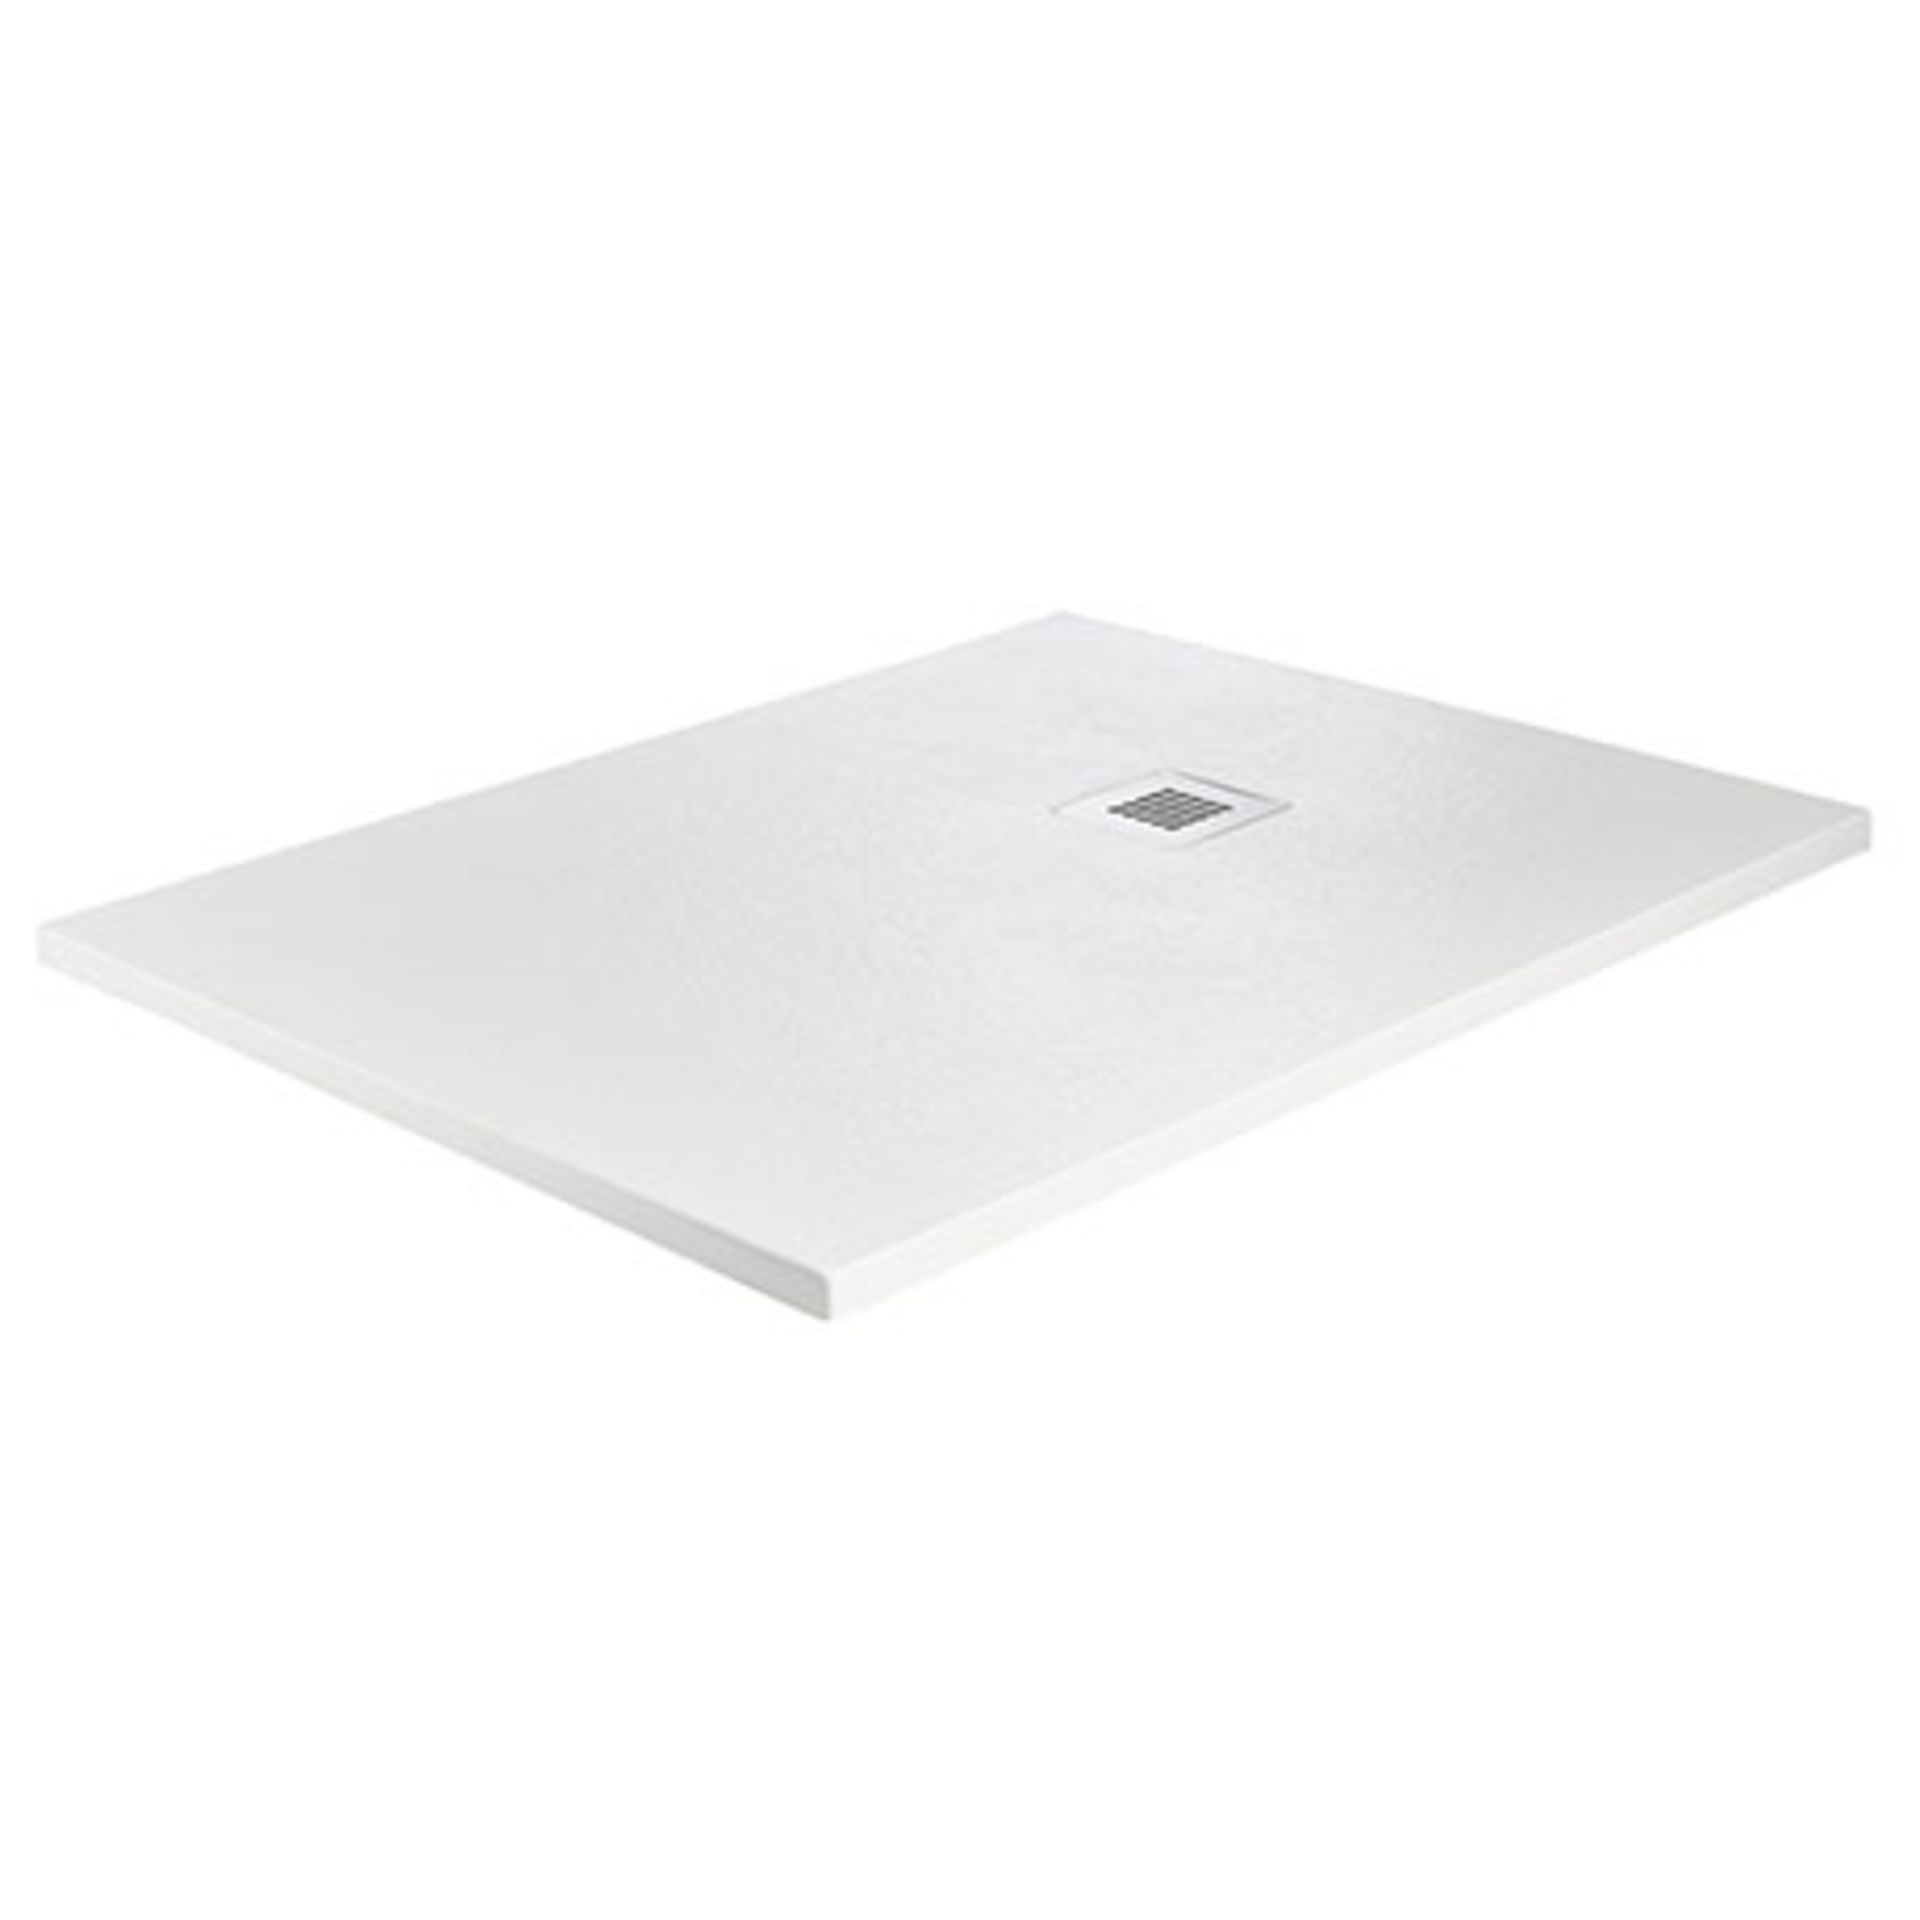 MCDET1404 TRAY LOW PROFILE WHITE 1400 X 900